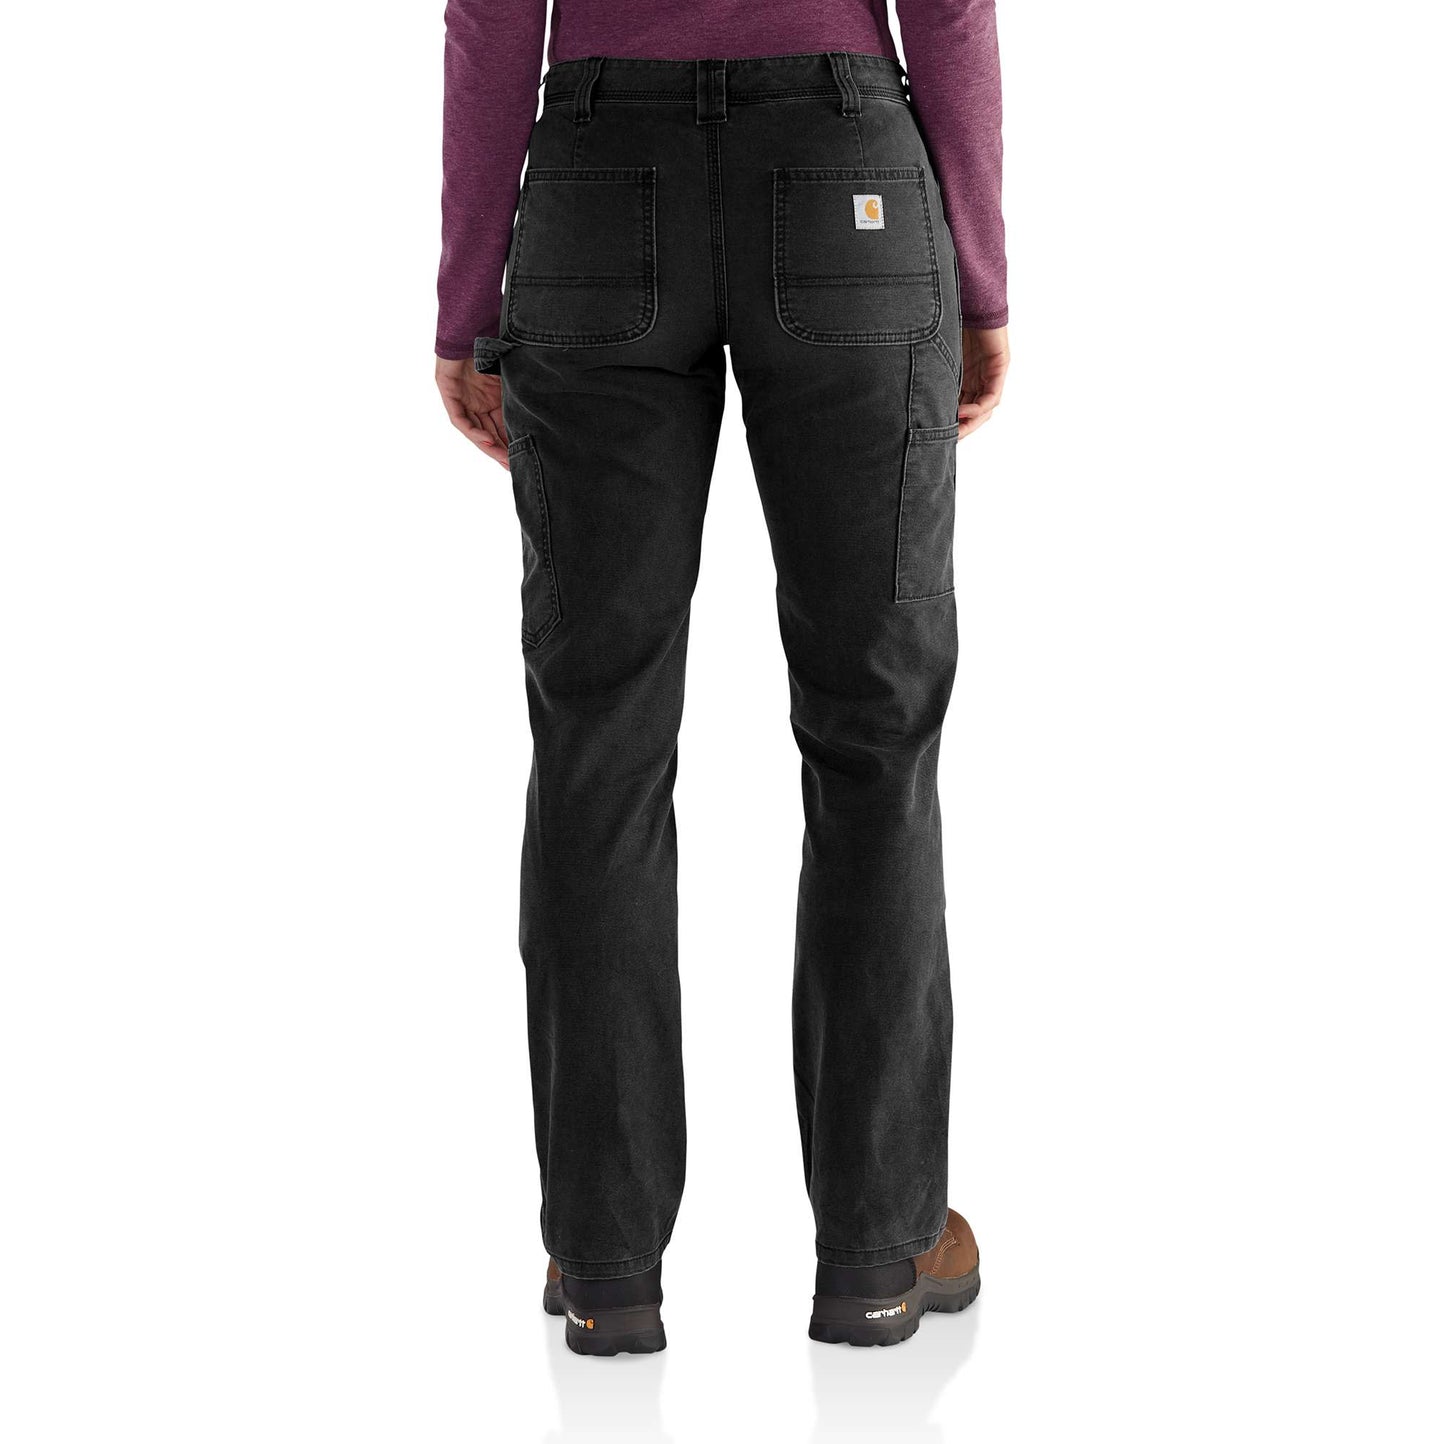 Rugged Flex® Loose Fit Canvas Double-Front Work Pant